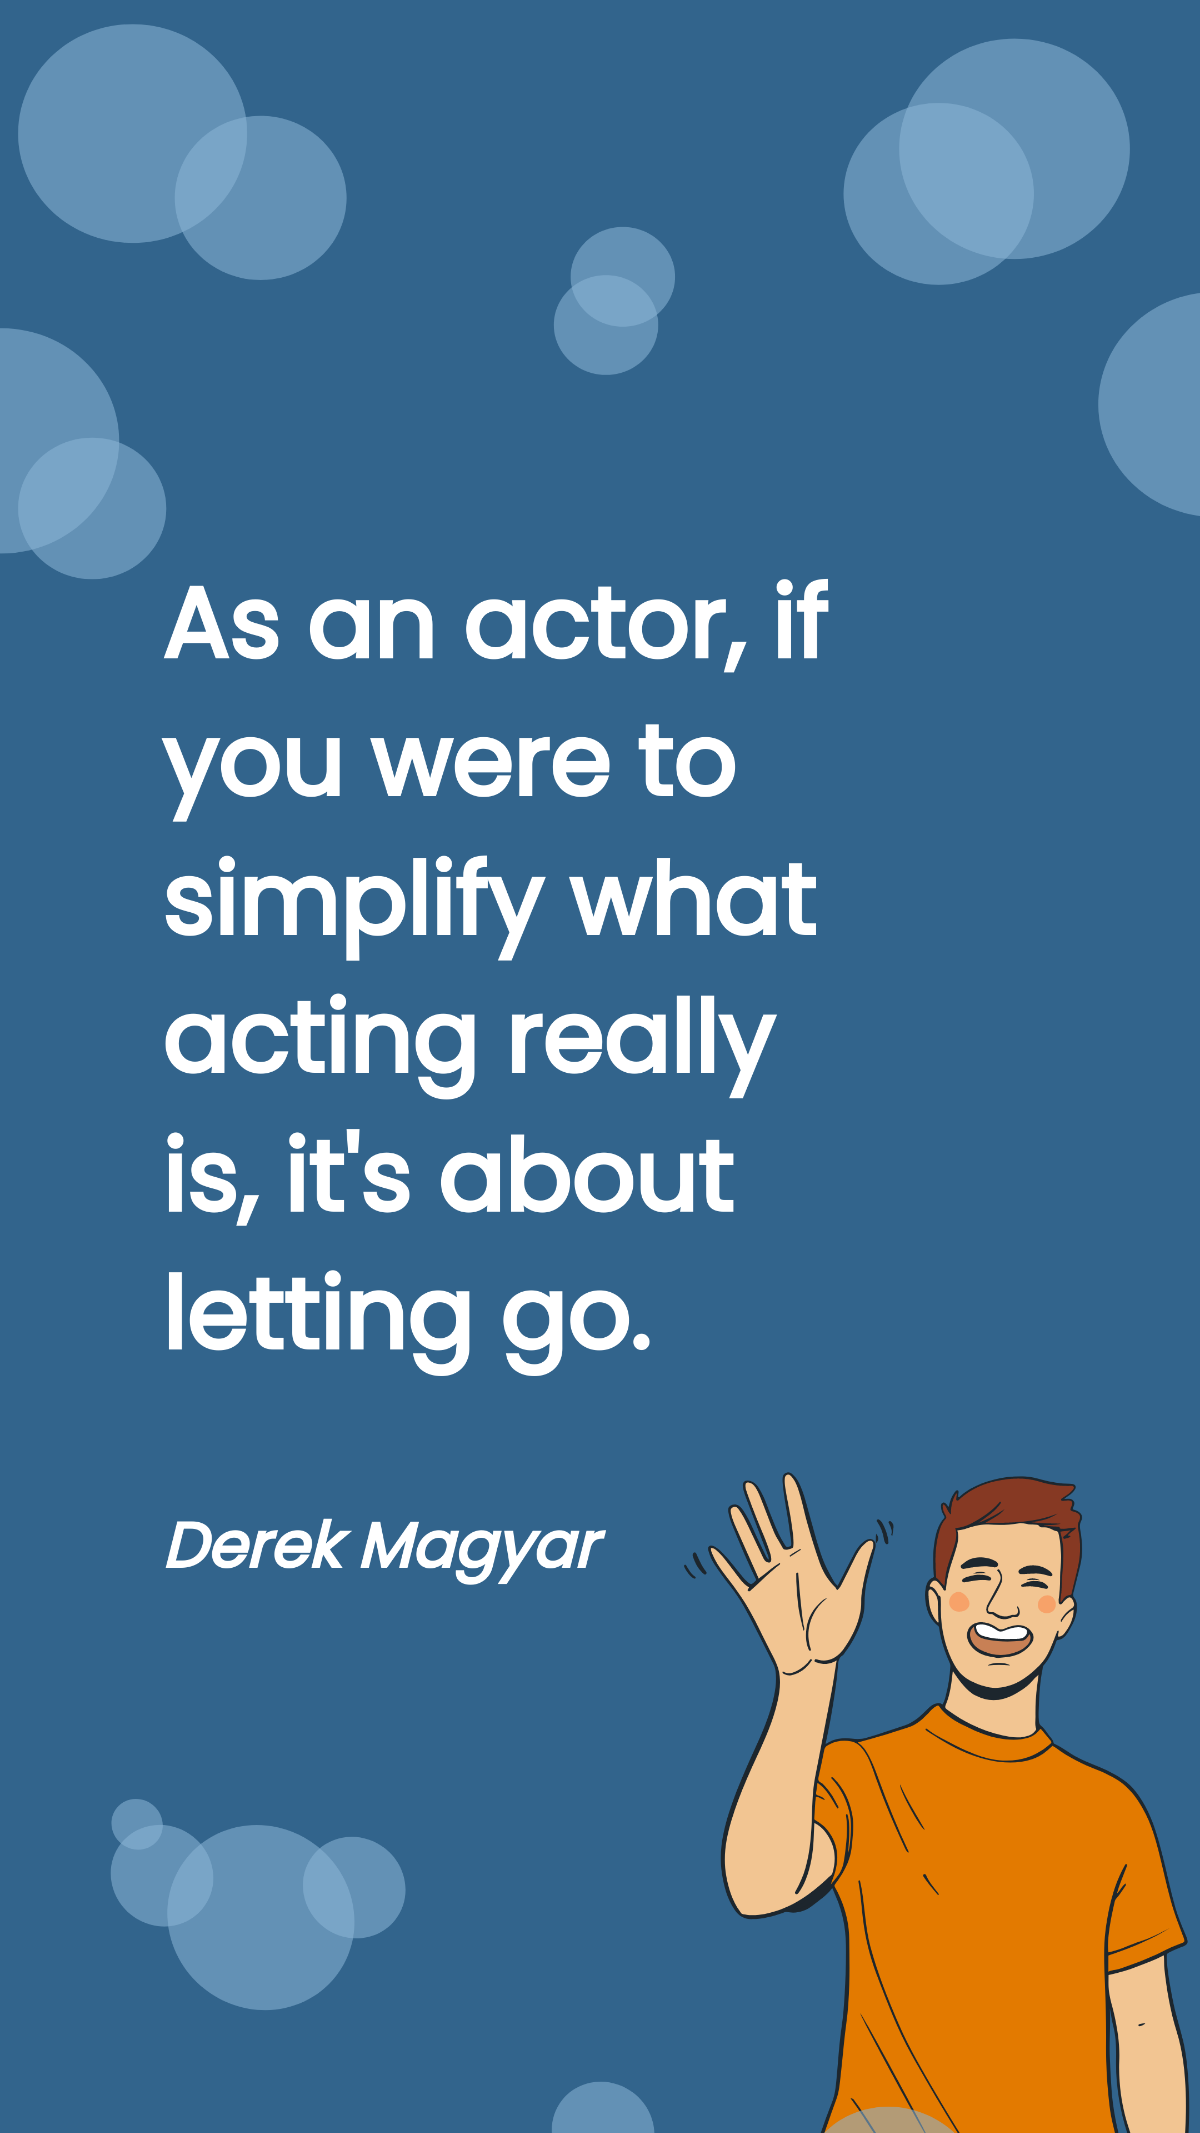 Derek Magyar - As an actor, if you were to simplify what acting really is, it's about letting go. Template